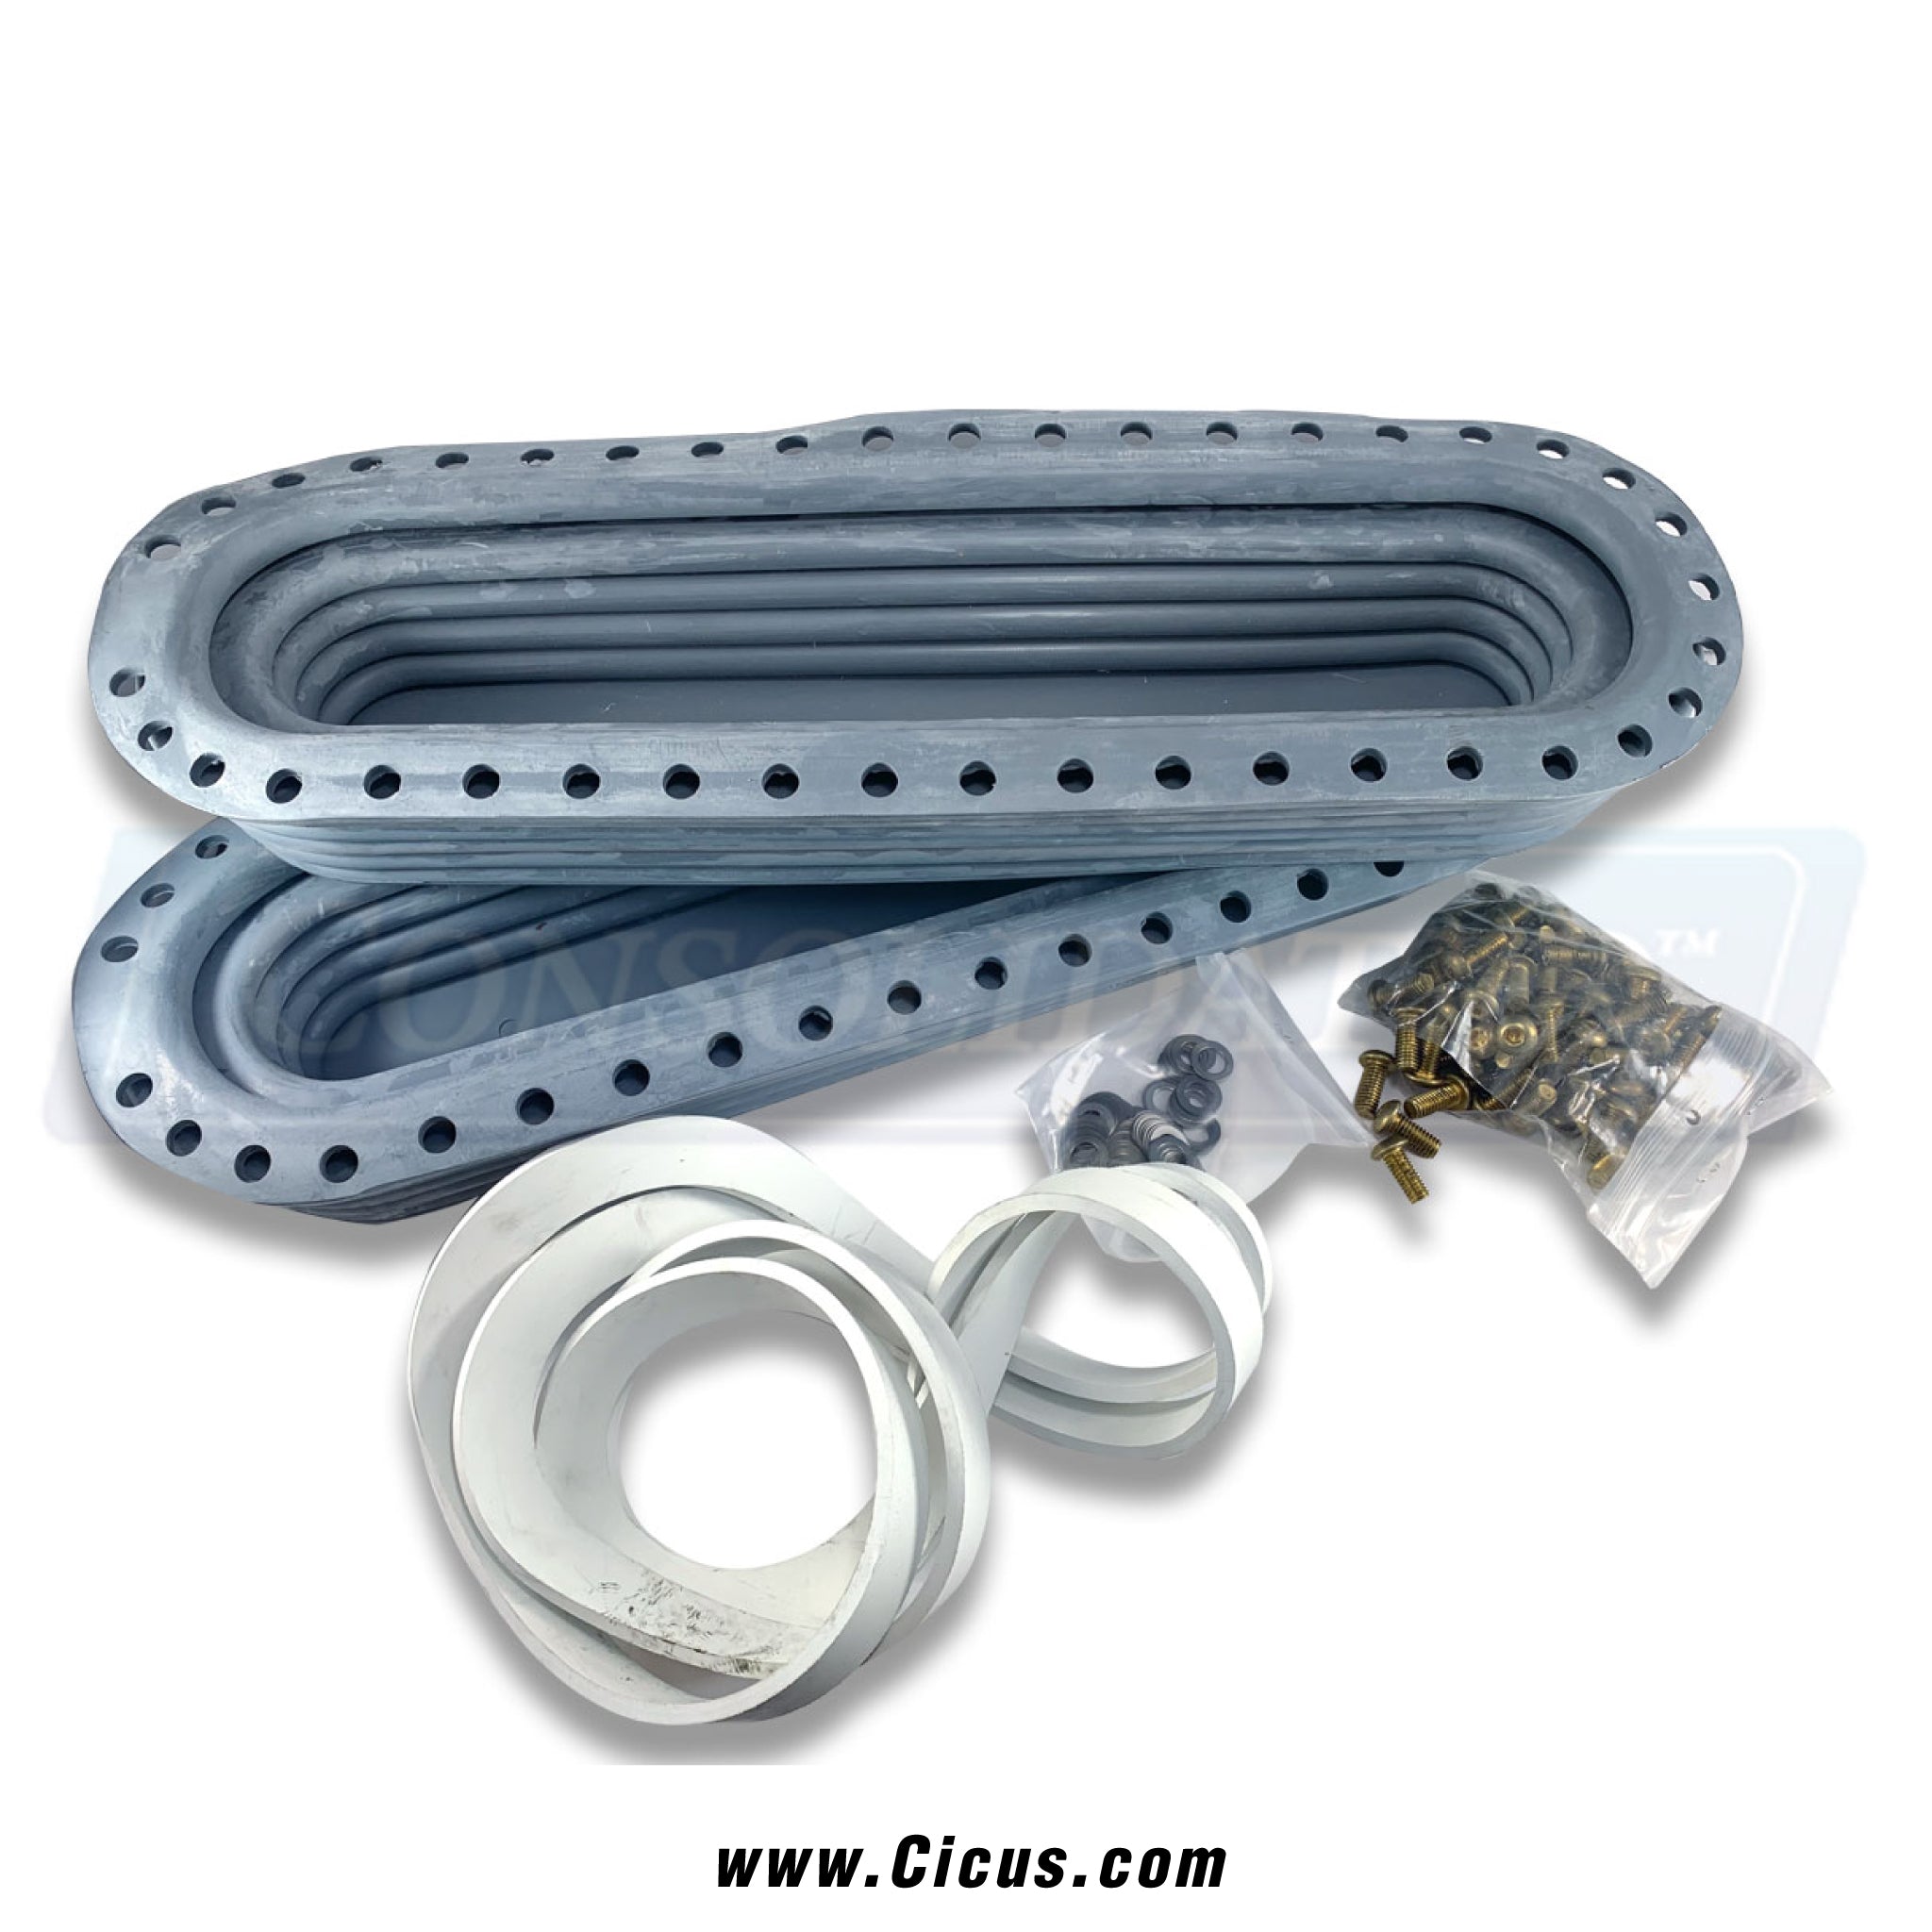 Milnor M7E 42 Extractor Inflatable Ribs Upgrade Kit [KQM-E00202]